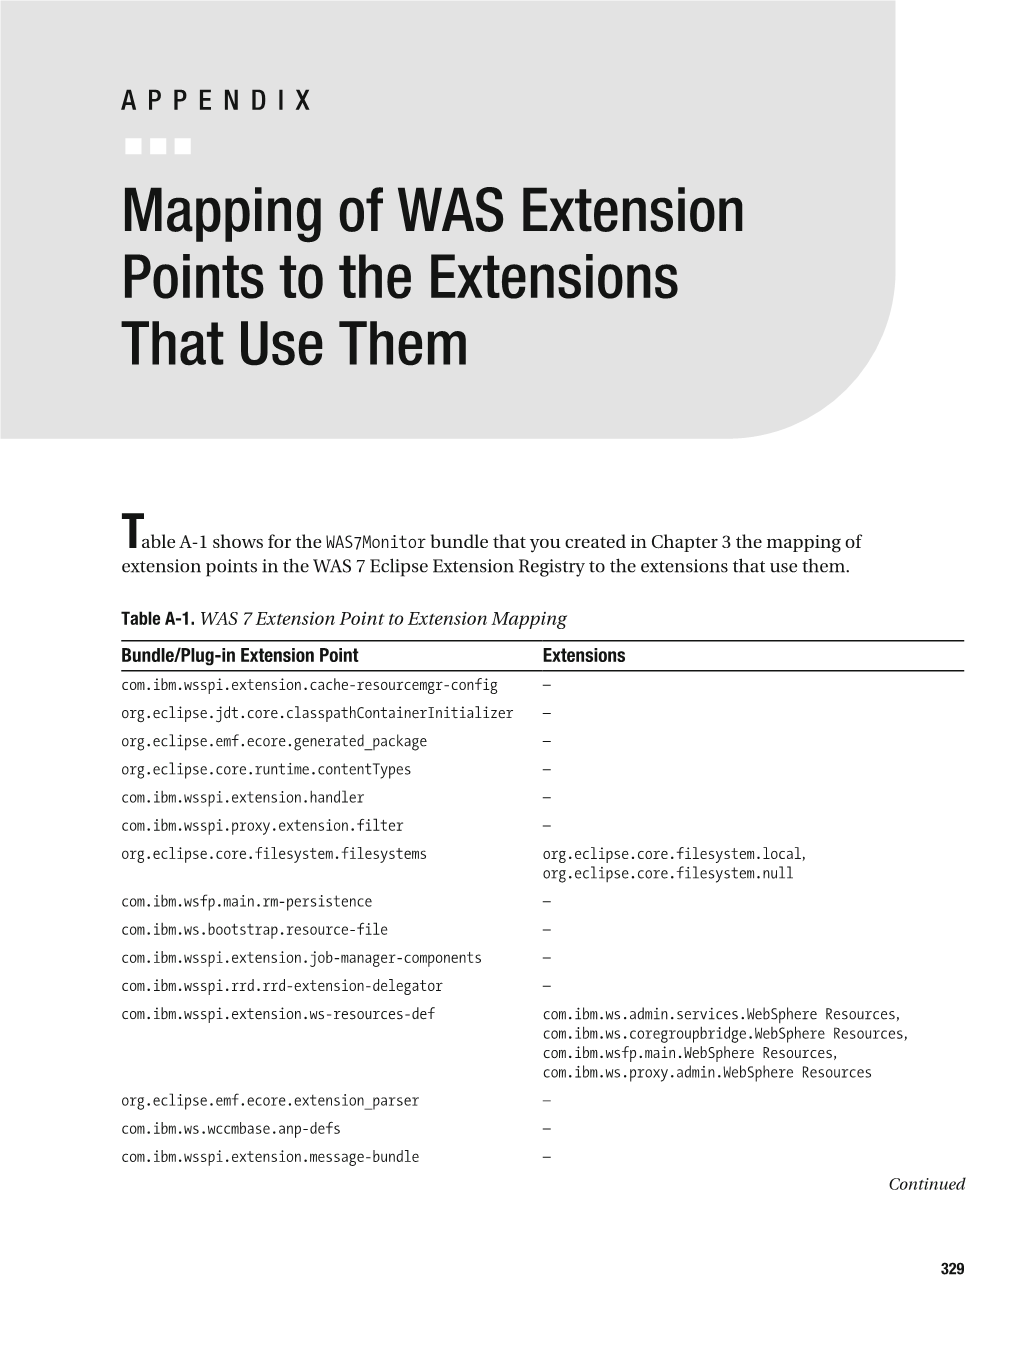 Mapping of WAS Extension Points to the Extensions That Use Them